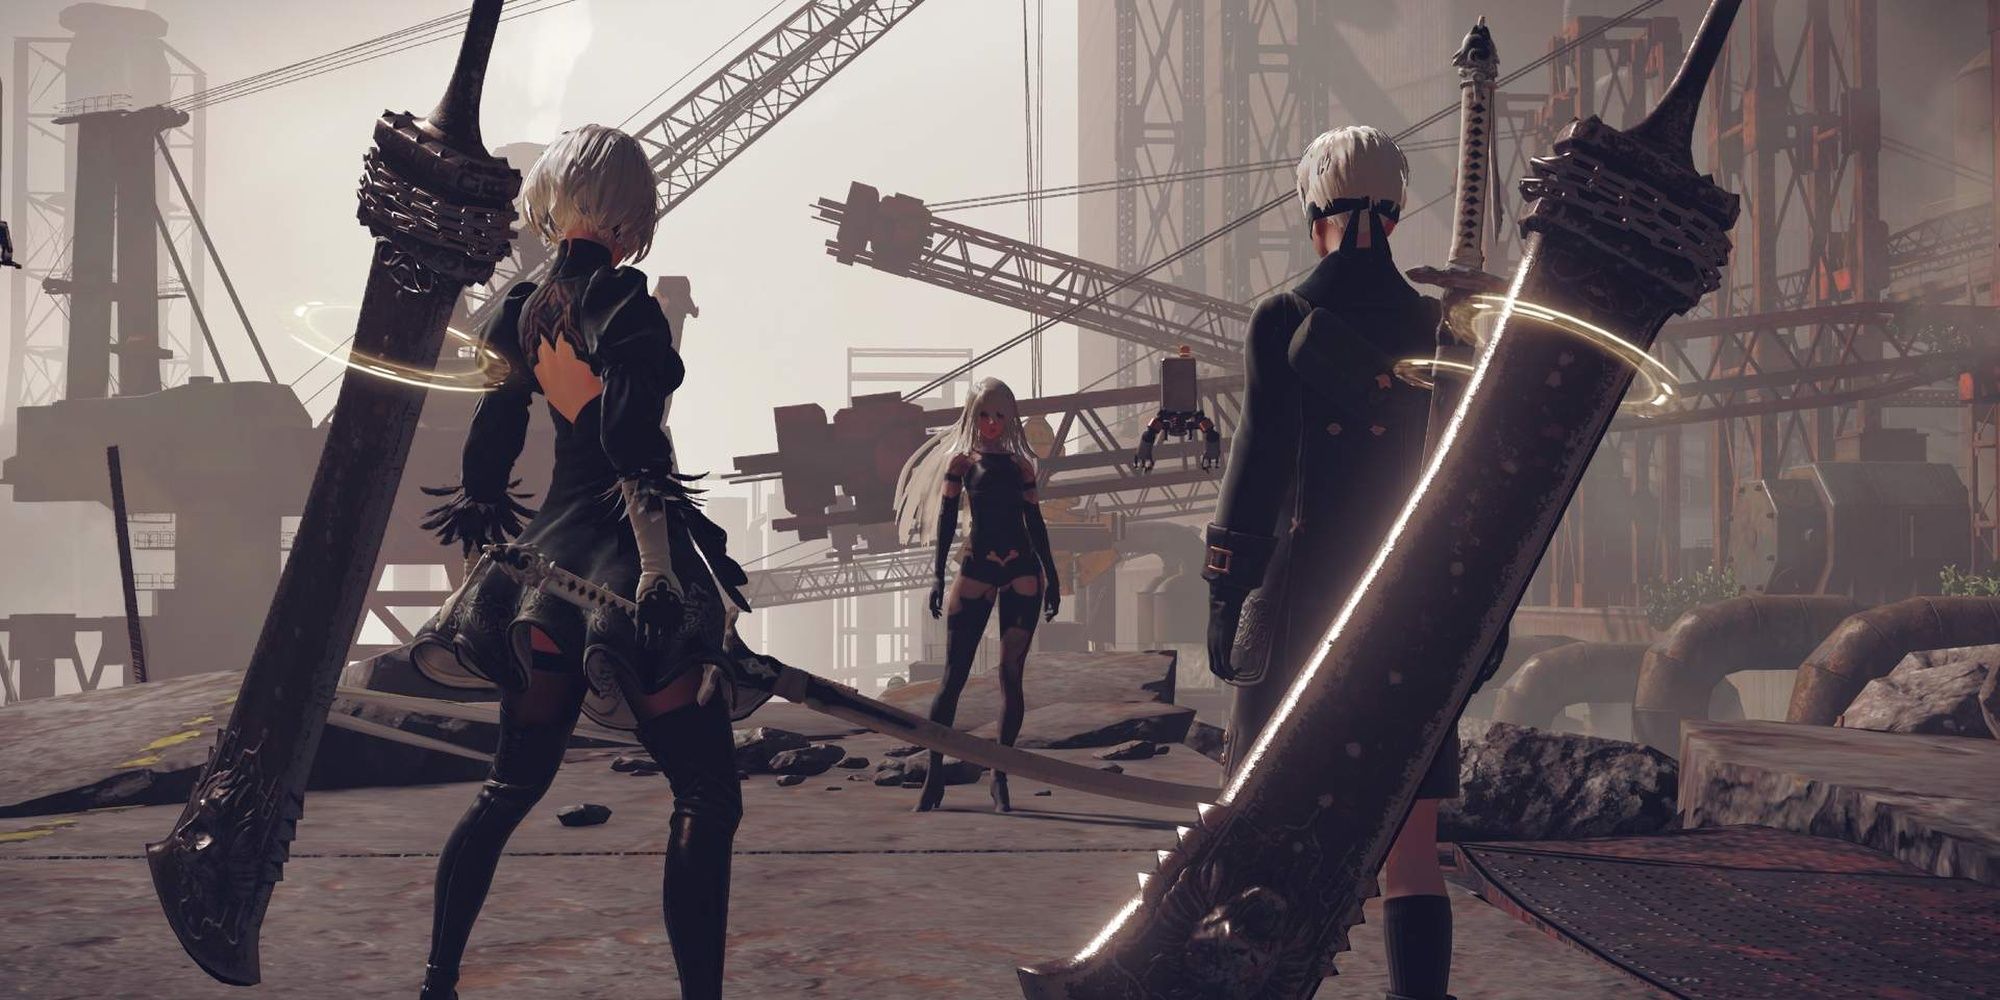 Nier: Automata 9S and 2B Meeting Another Android during Cutscene